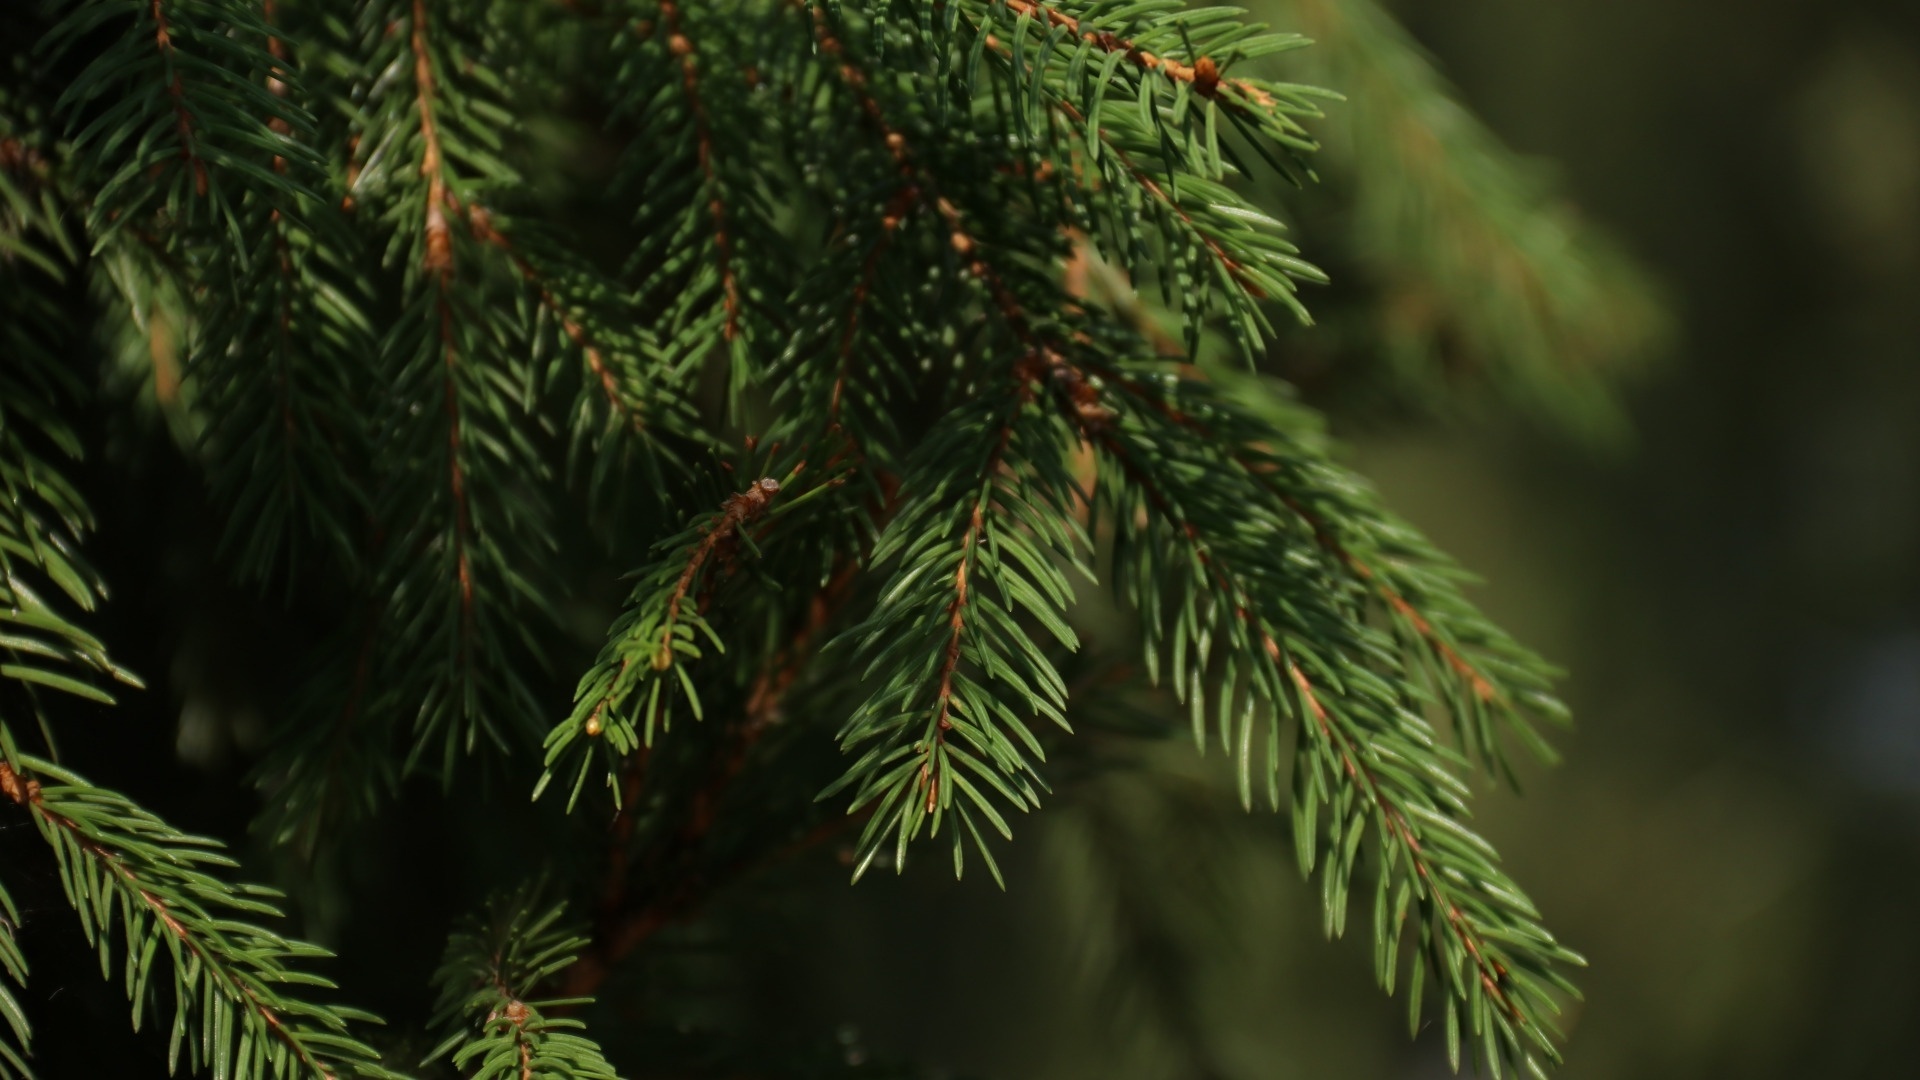 Spruce branches, Nature close-up, Detailed textures, Organic patterns, 1920x1080 Full HD Desktop